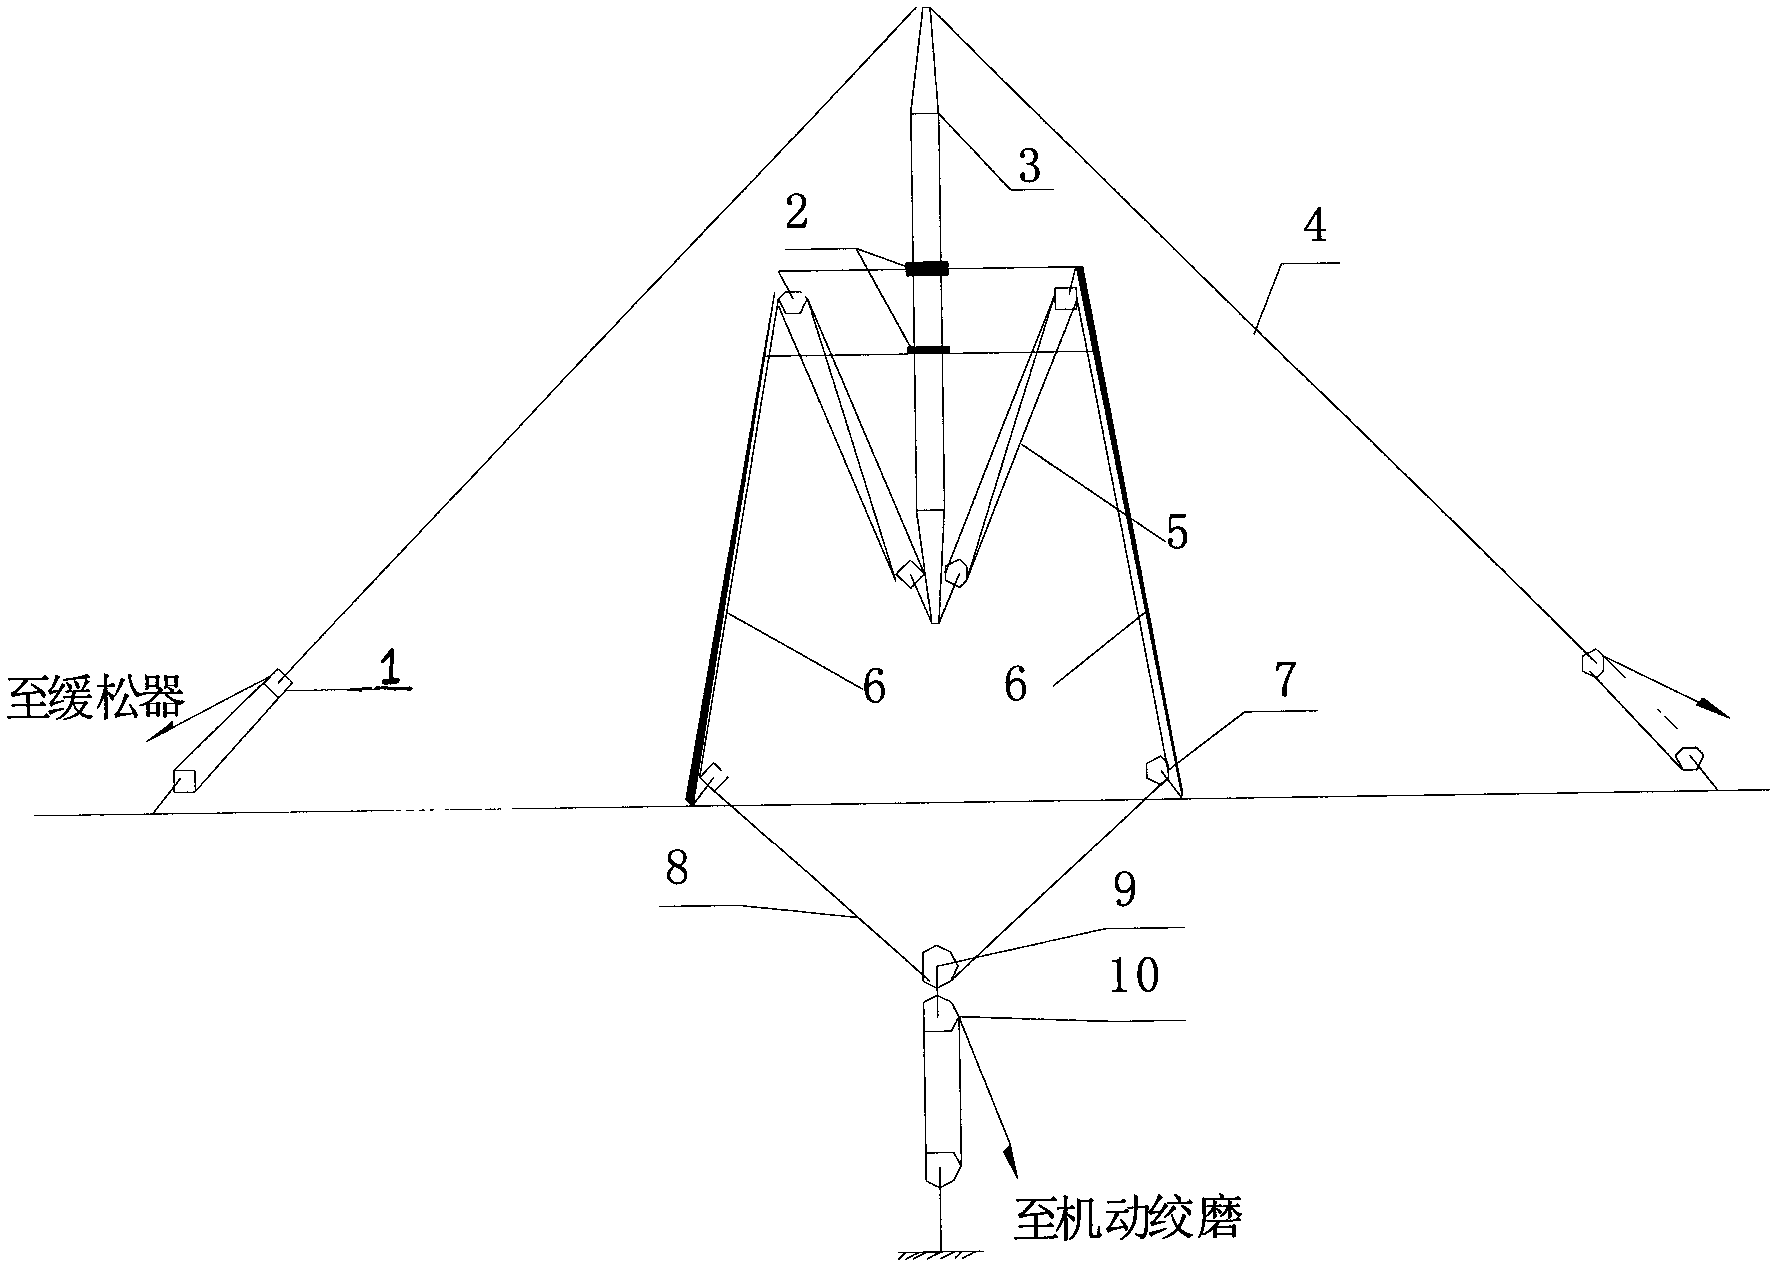 Extra-high voltage common circuit iron tower assembling method